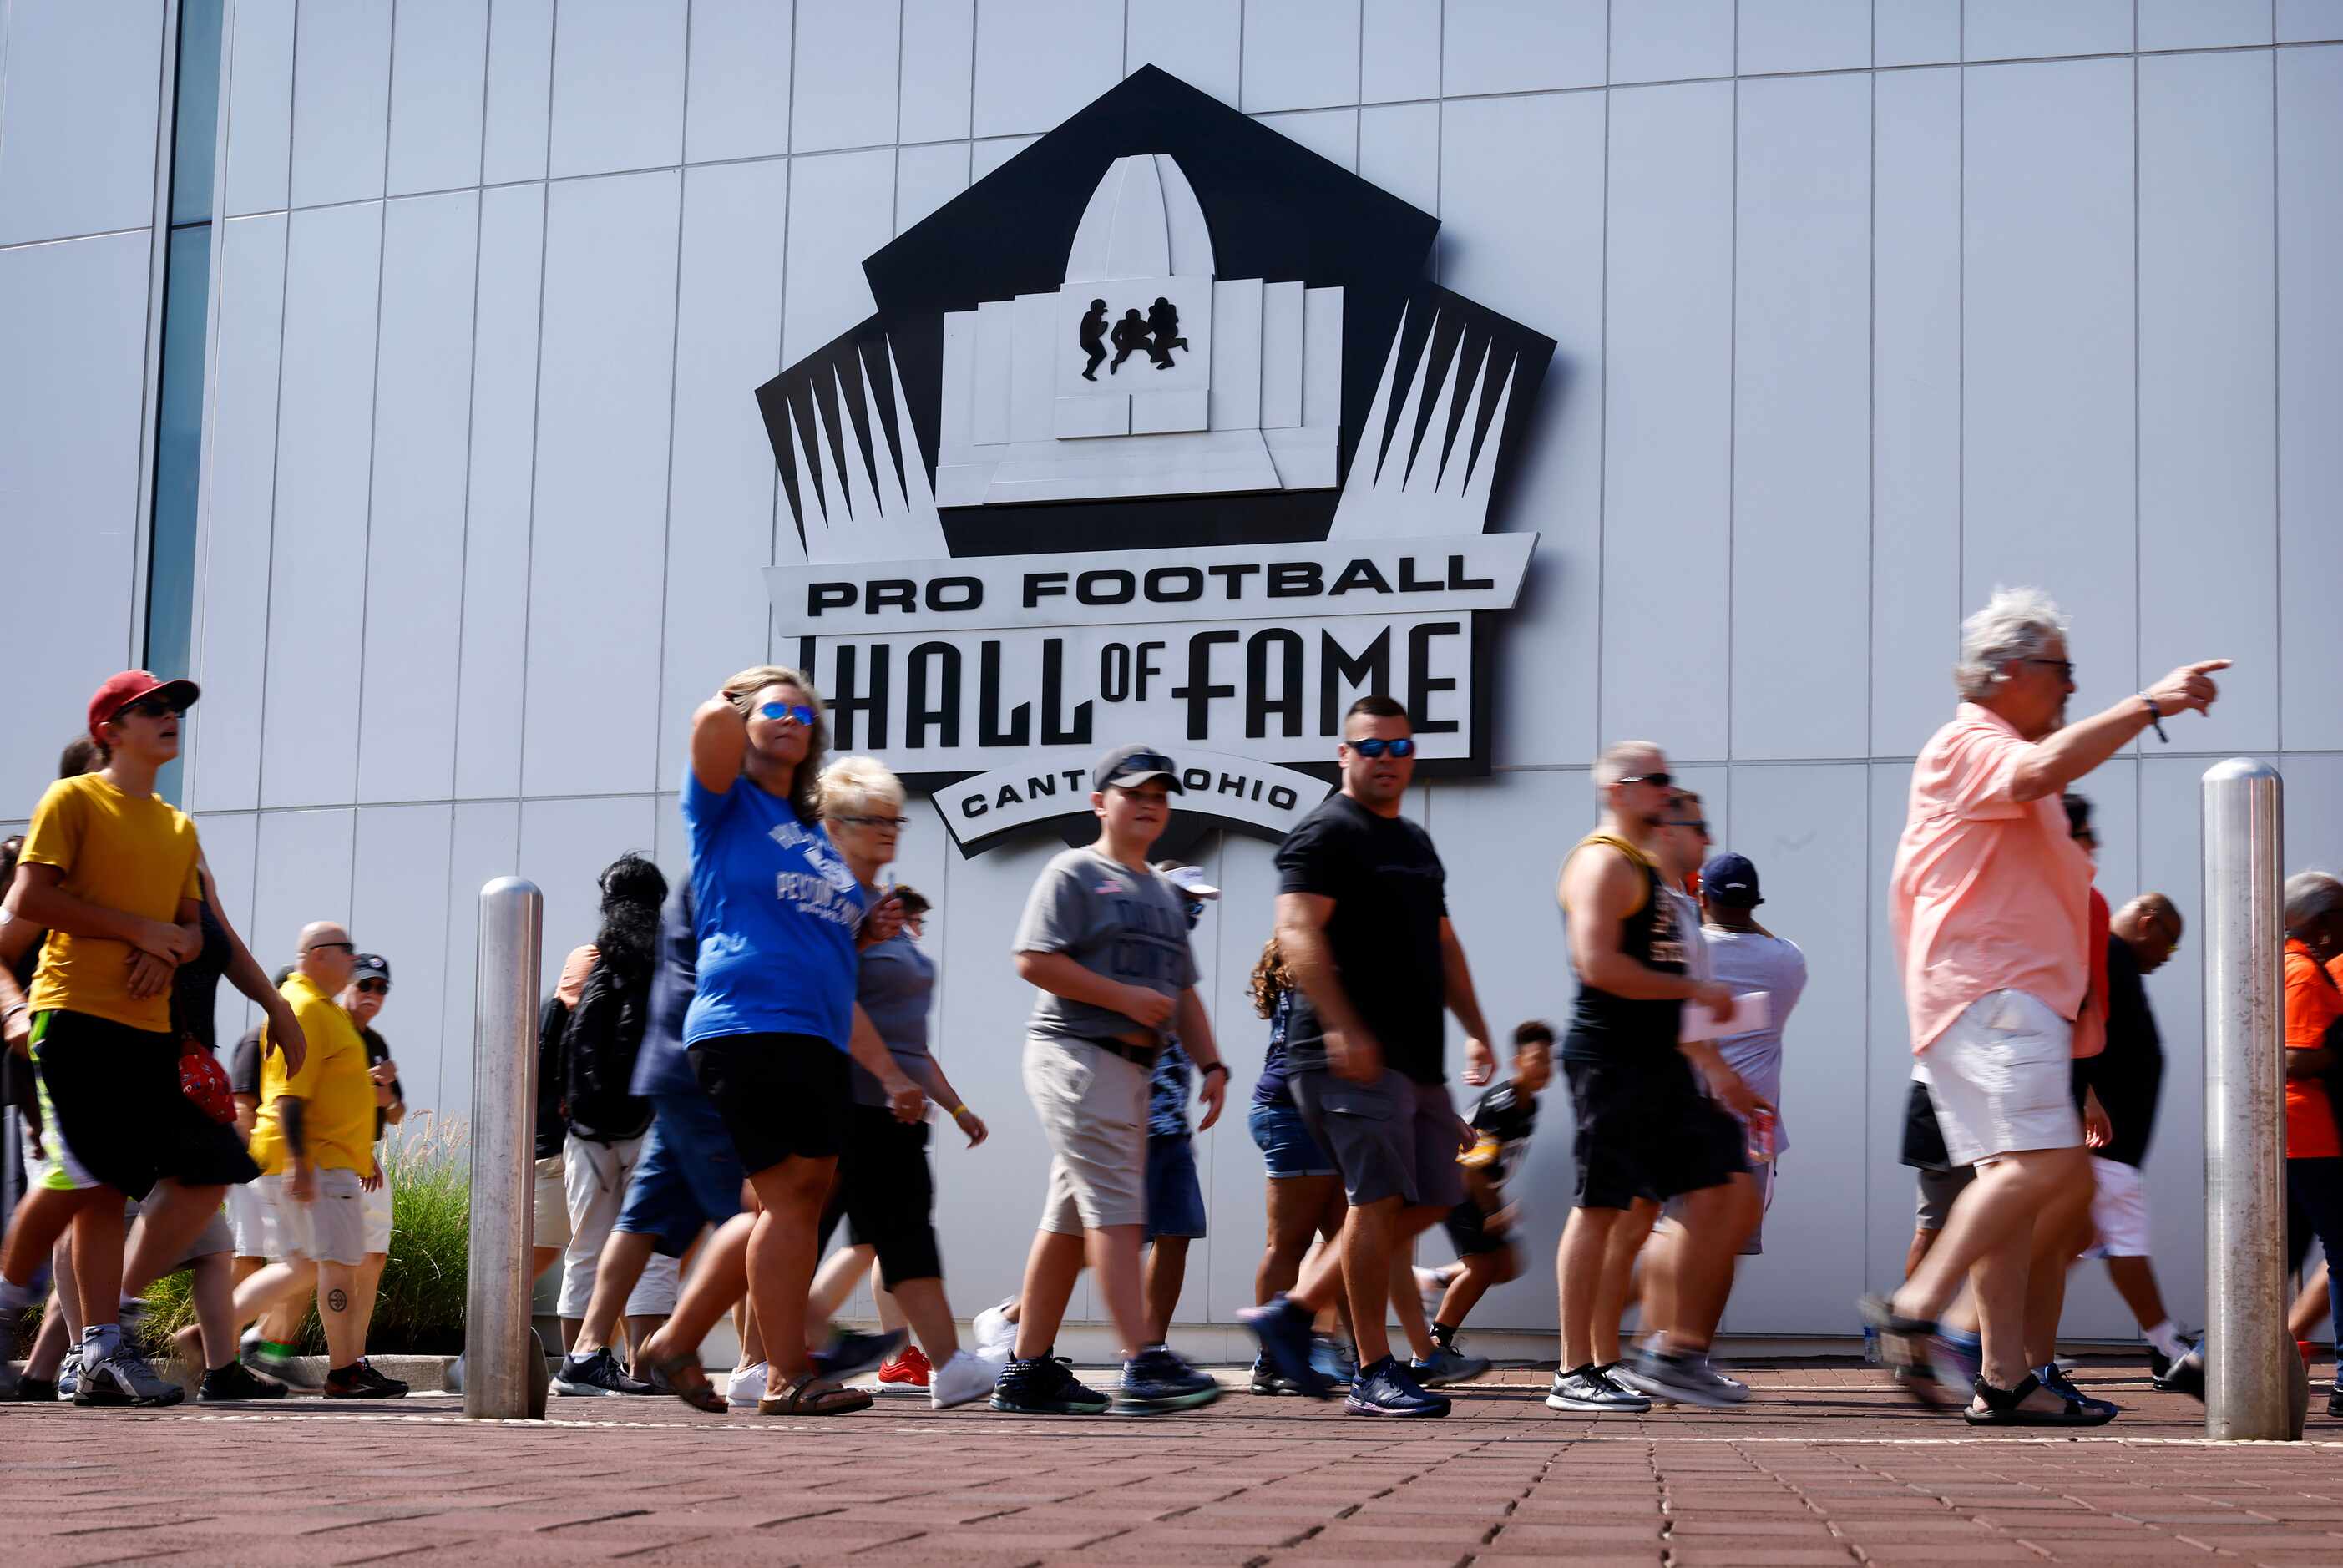 Football fans head for the front door of the Pro Football Hall of Fame in Canton, Ohio...